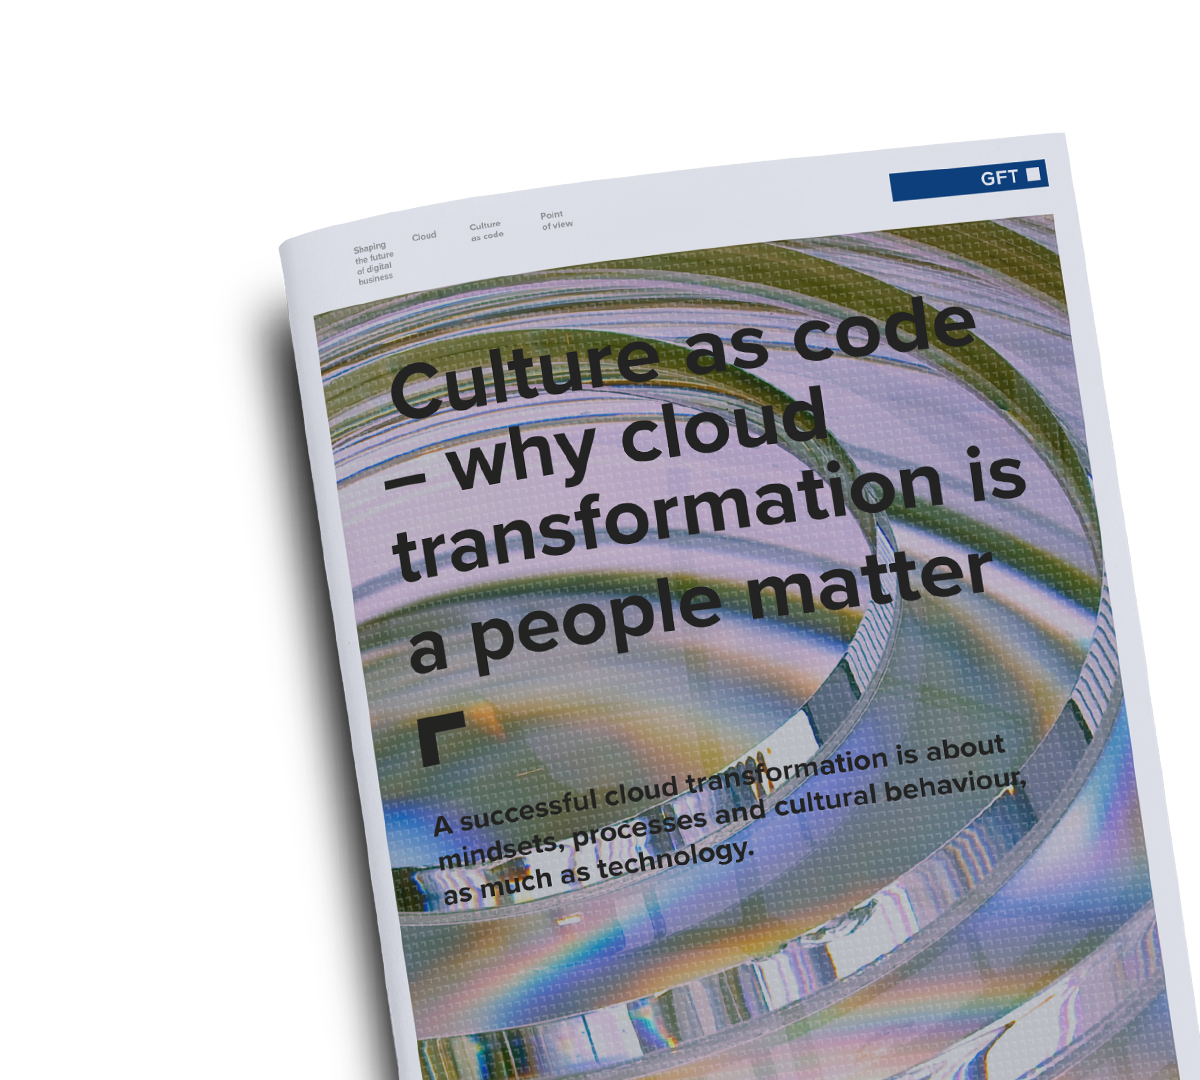 Thought leadership: Culture as code – why cloud transformation is a people matter